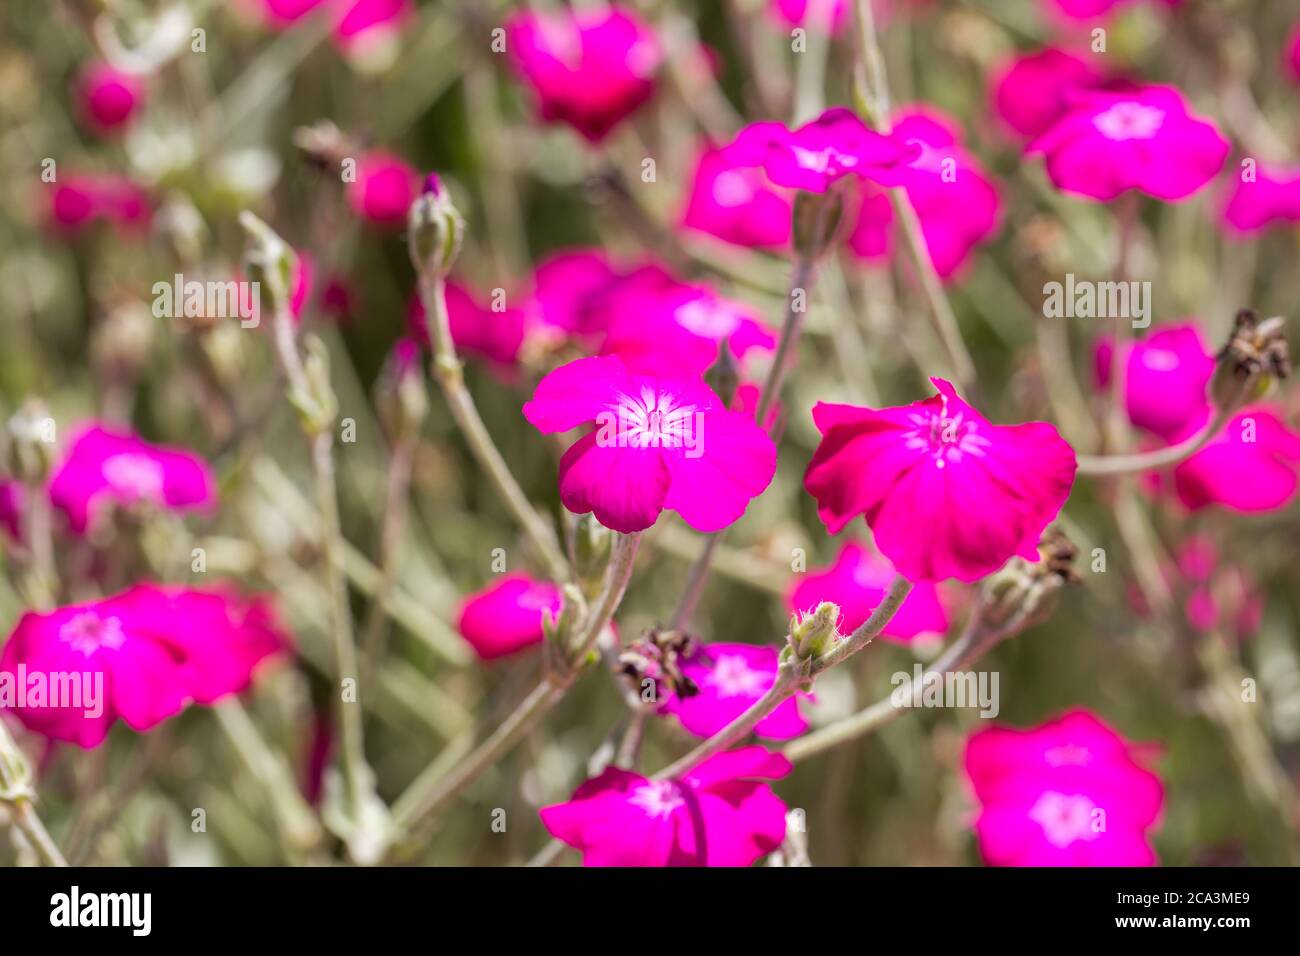 Close up of Lychnis coronaria flower. A flowering plant in the family Caryophyllaceae. Blurry background. Stock Photo